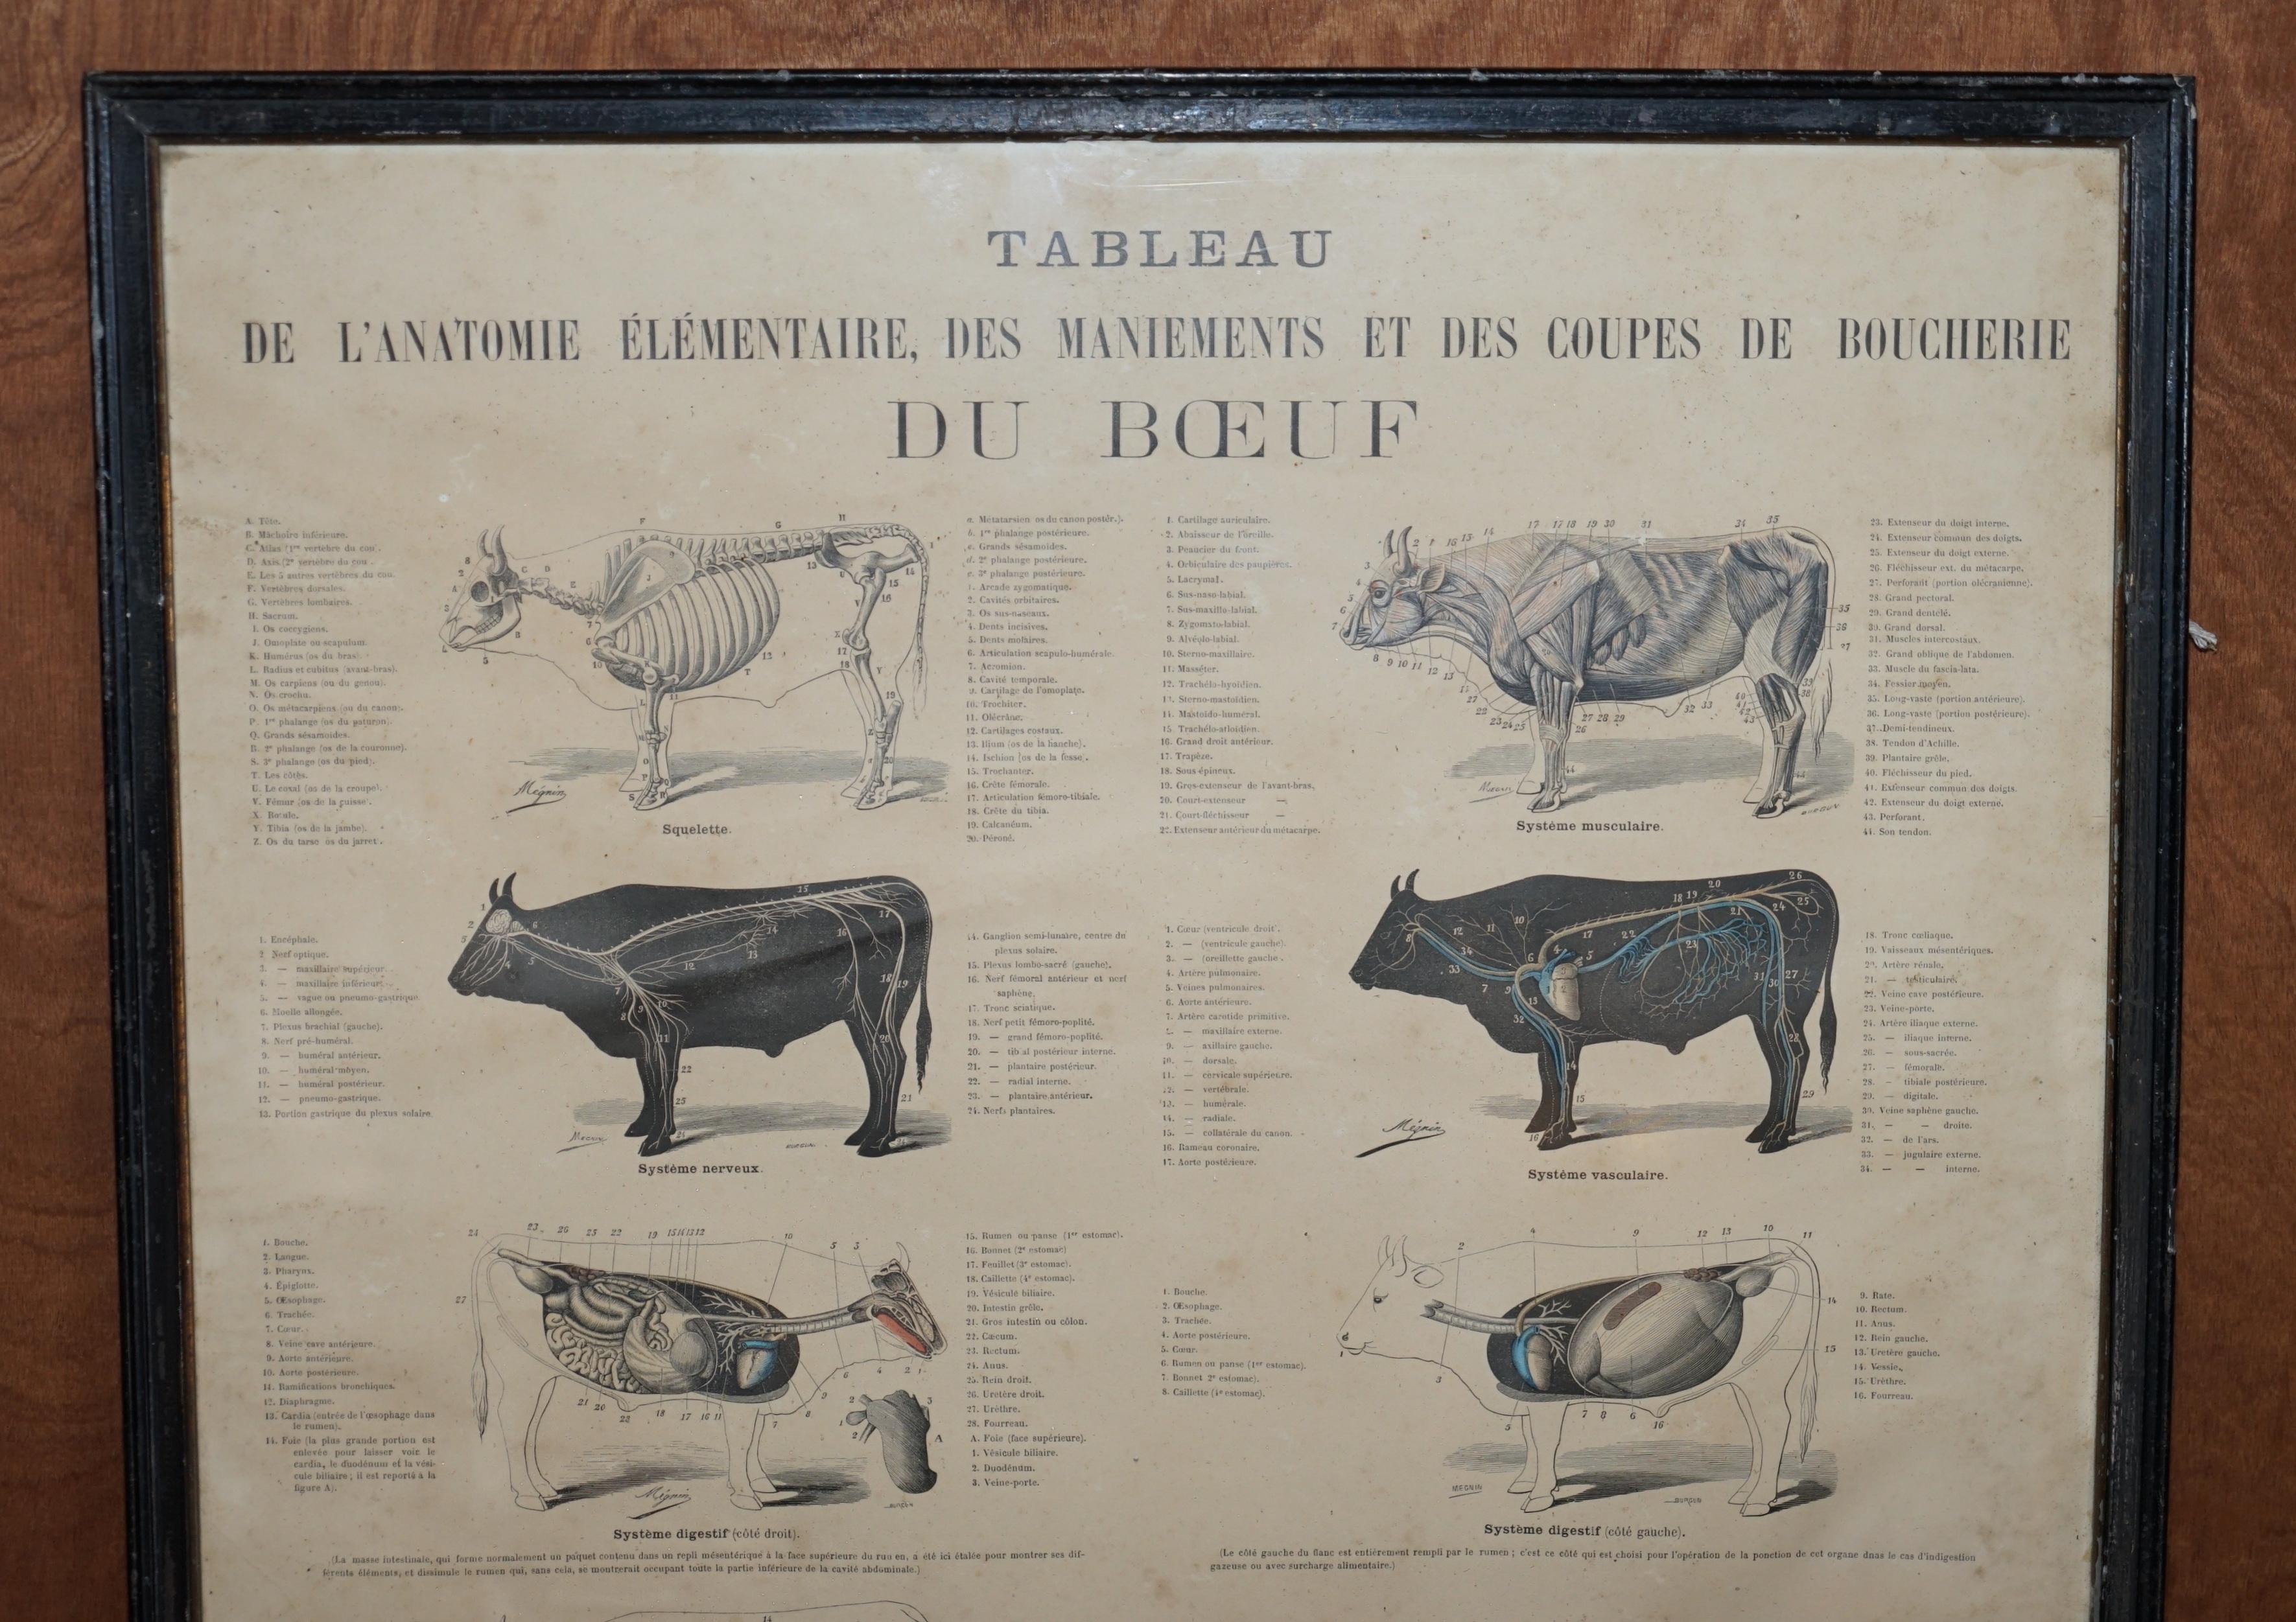 We are delighted to offer for sale this stunning original Antique French print depicting Cow’s and butchering for the cuts of beef

A good looking and well made piece, I have another three listed under my other items, one pair are of the anatomy